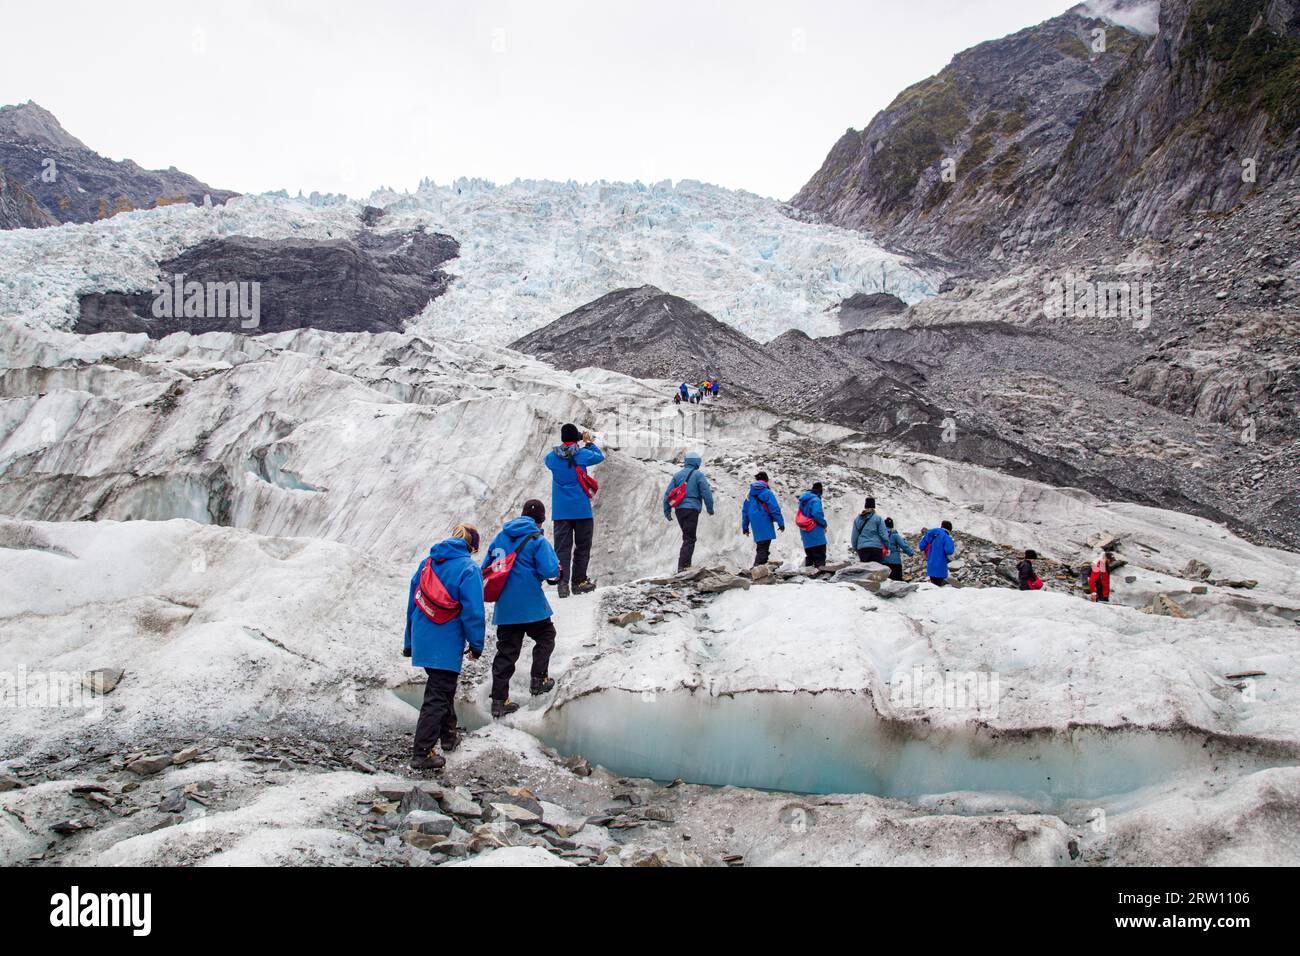 Franz Josef, New Zealand, March 22, 2015: A group of tourists hiking towards a helicopter on Franz Josef Glacier Stock Photo